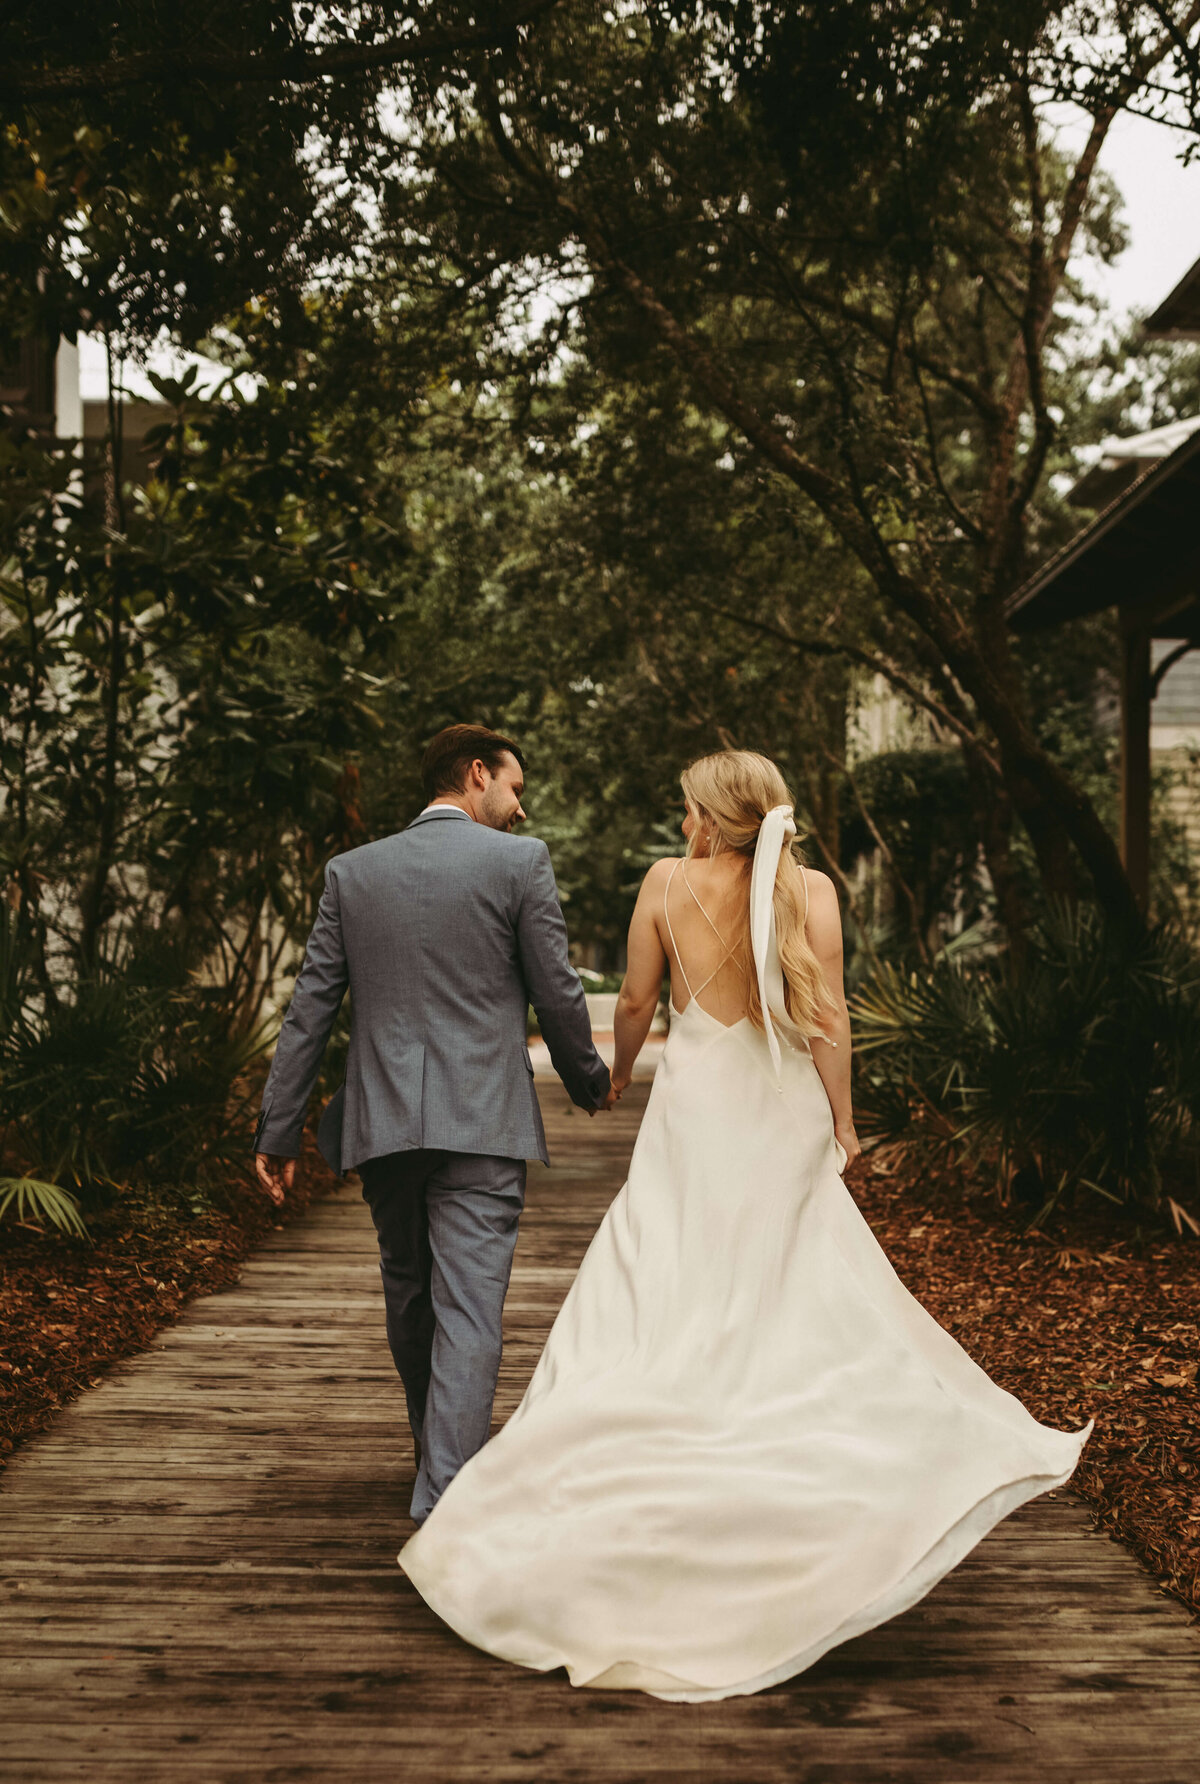 newlyweds hold hands and run with wedding dress flowing behind after private elopement in rosemary beach